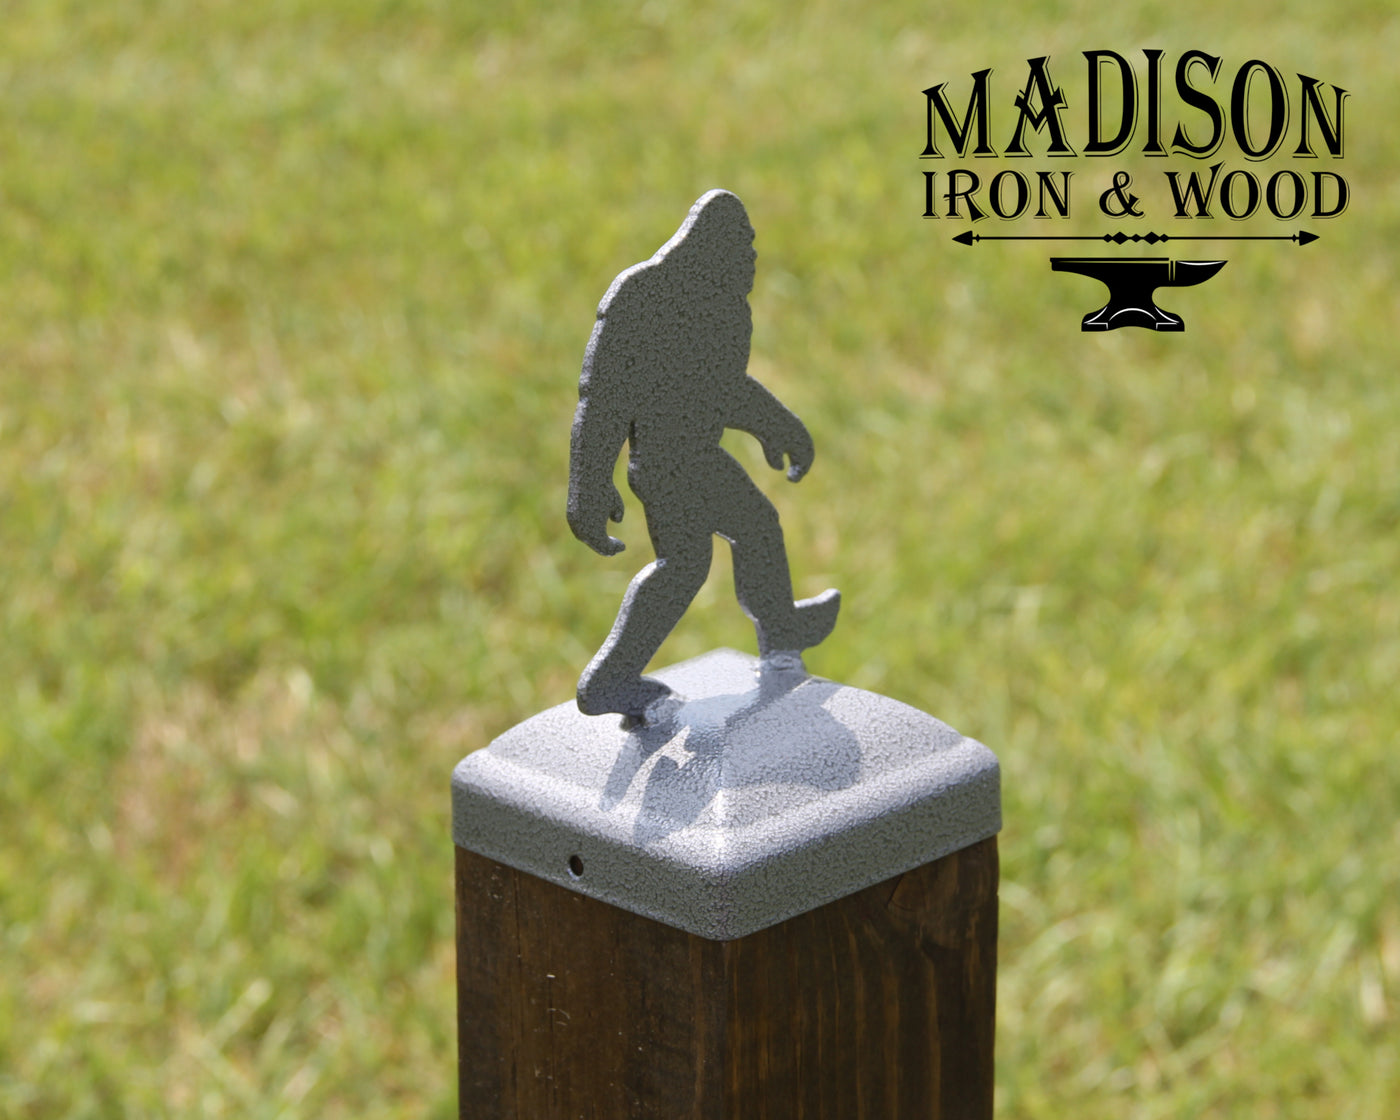 4x4 Big Foot Post Cap - Madison Iron and Wood - Post Cap - metal outdoor decor - Steel deocrations - american made products - veteran owned business products - fencing decorations - fencing supplies - custom wall decorations - personalized wall signs - steel - decorative post caps - steel post caps - metal post caps - brackets - structural brackets - home improvement - easter - easter decorations - easter gift - easter yard decor